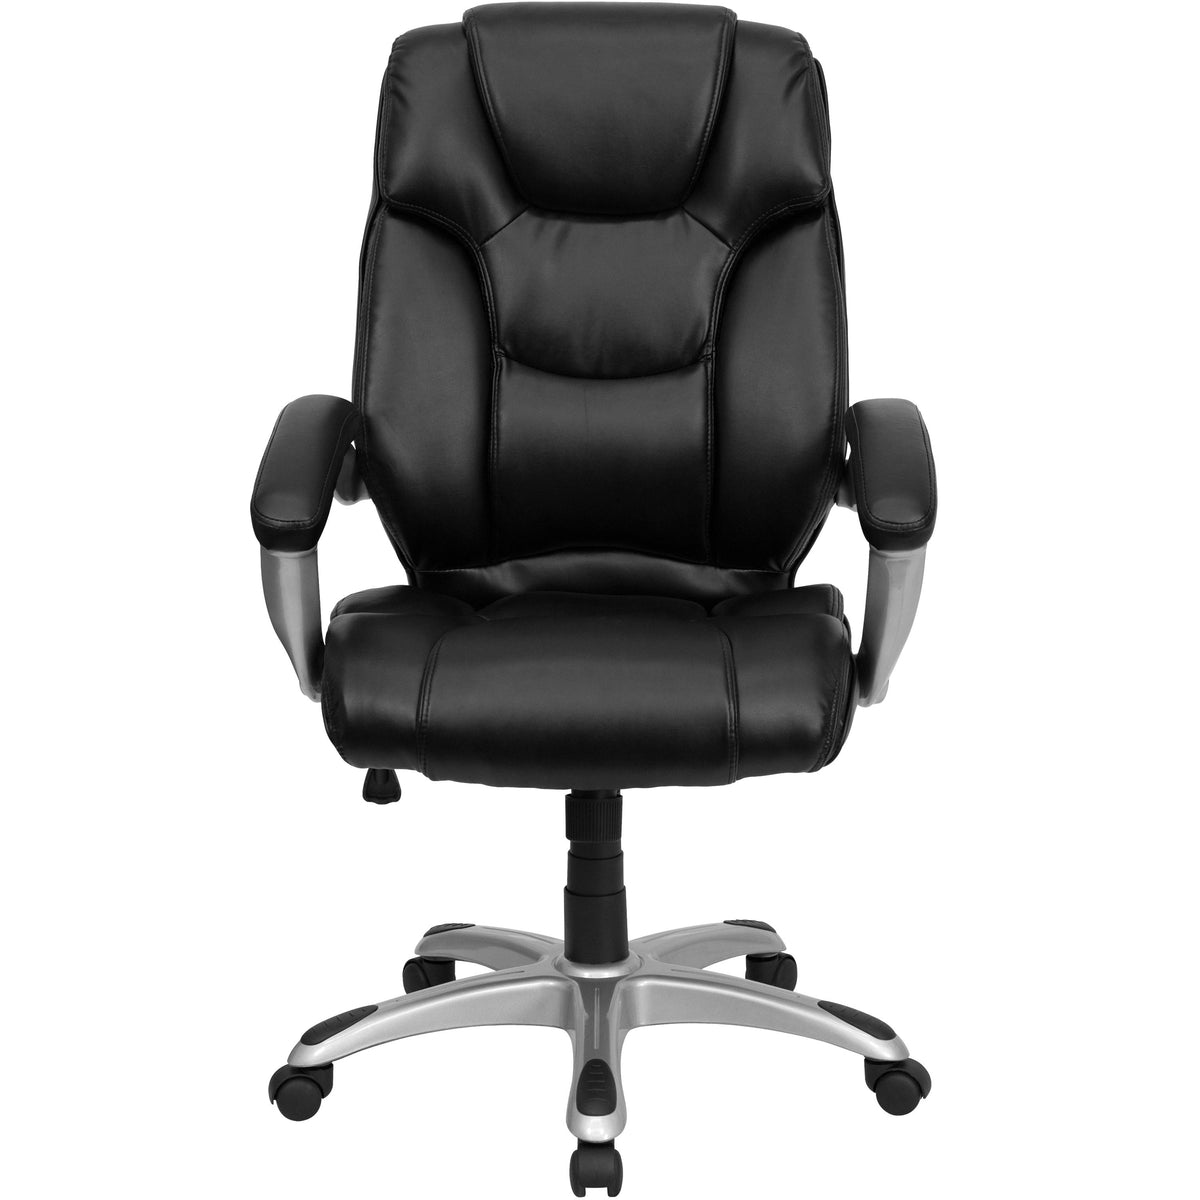 High Back Black LeatherSoft Layered Upholstered Office Chair w/Silver Nylon Base